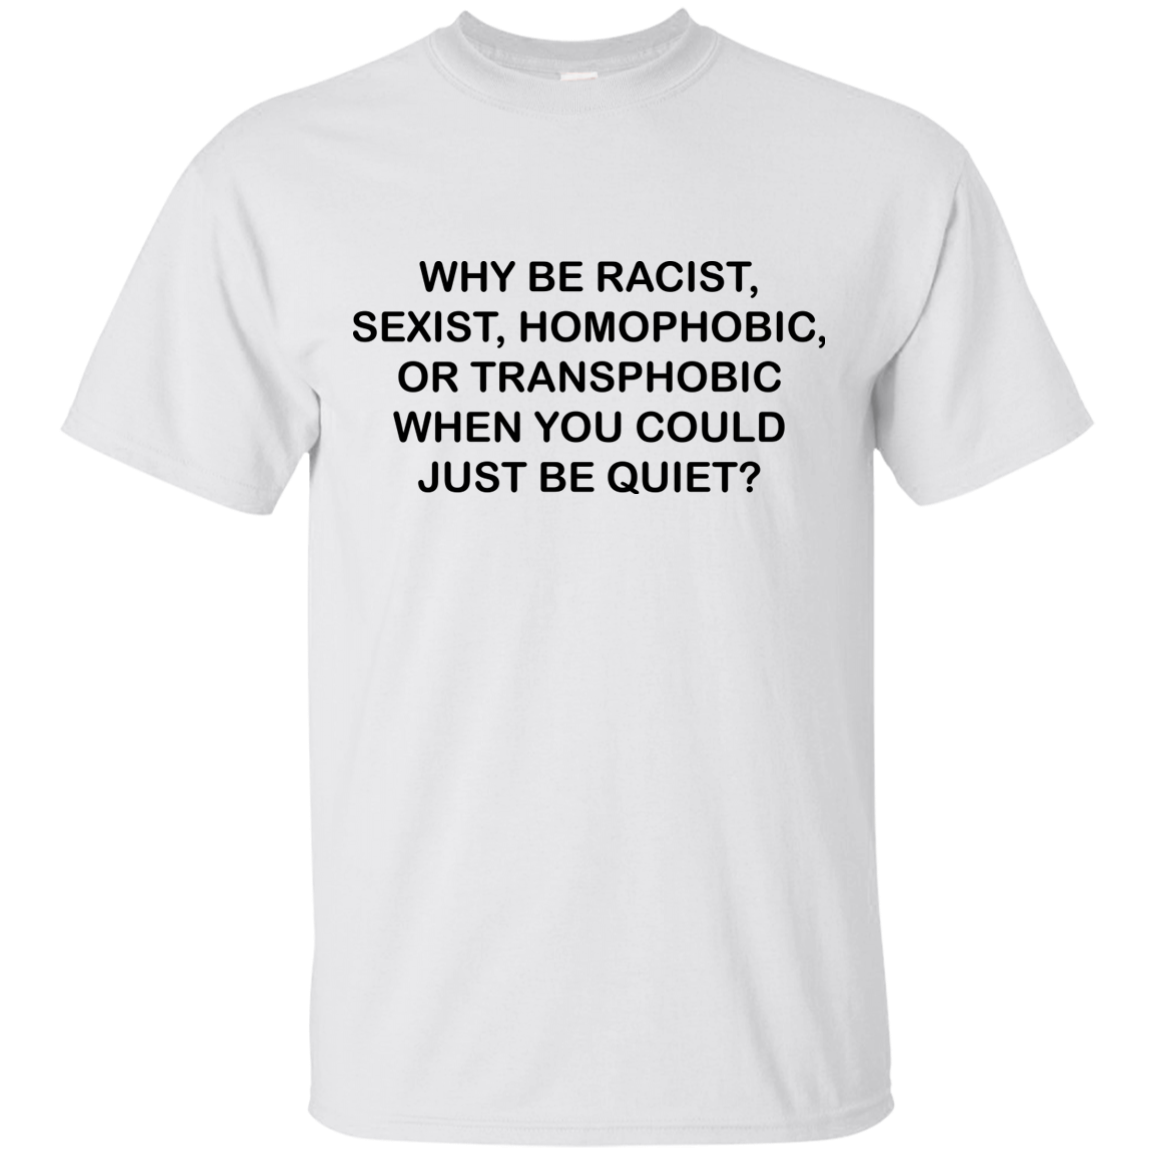 Why be racist, when you could just be quiet t-shirt